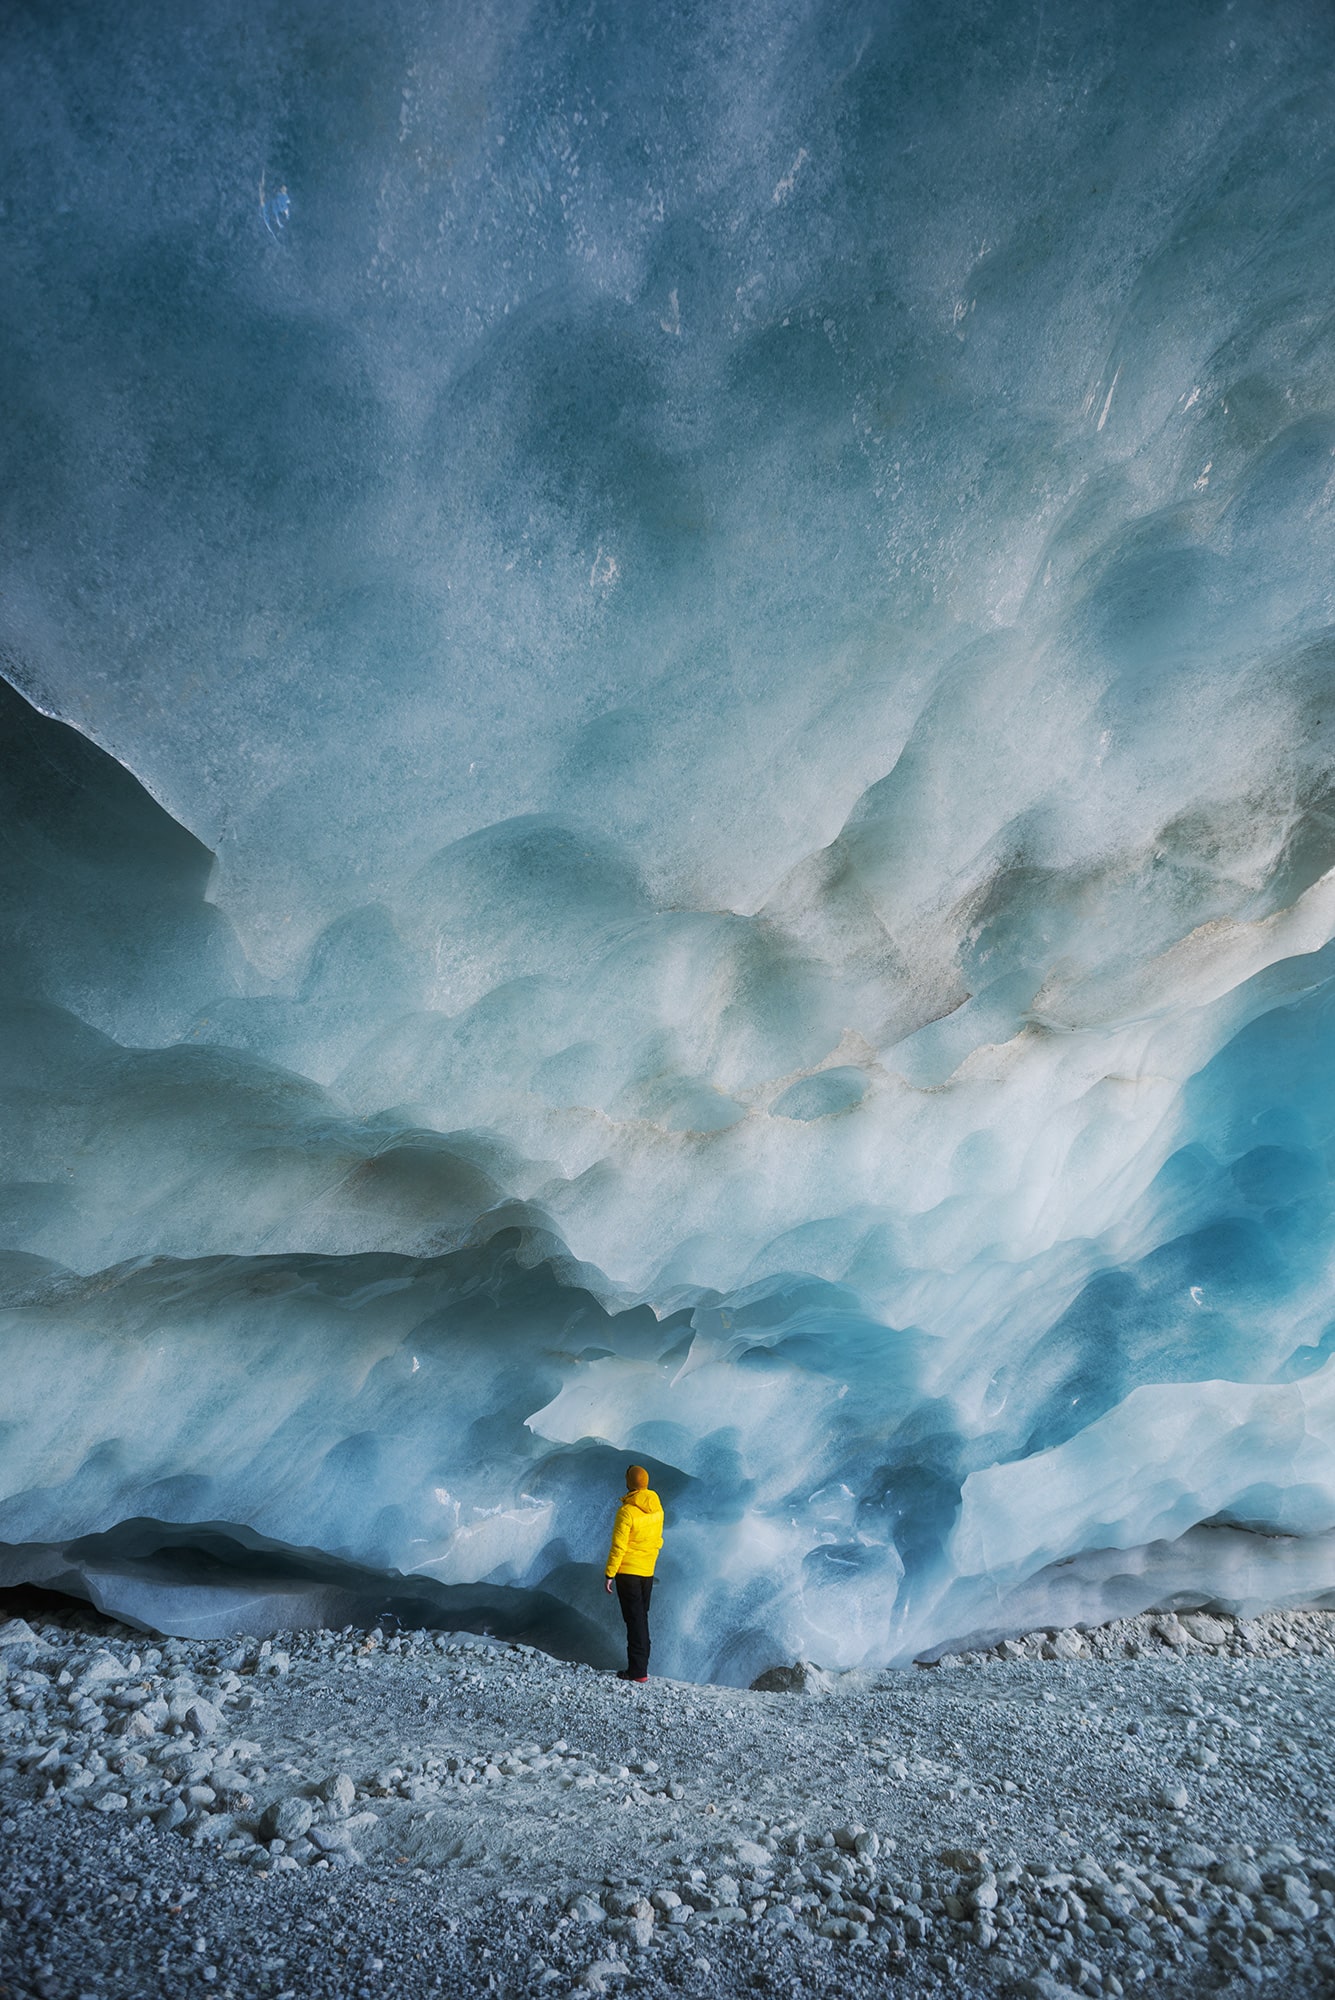 Immerse yourself in the grandeur of the Zinal Glacier Ice Cave, as showcased in this epic landscape photograph. Against the backdrop of the towering ice wall, a mountaineer clad in a vibrant yellow jacket adds scale and intrigue to the scene. Located in the breathtaking Swiss Alps, this dramatic view captures the essence of nature's majesty. Expertly captured by photographer Jennifer Esseiva using her Nikon D810, this image invites you to explore the wonders of the Swiss wilderness.